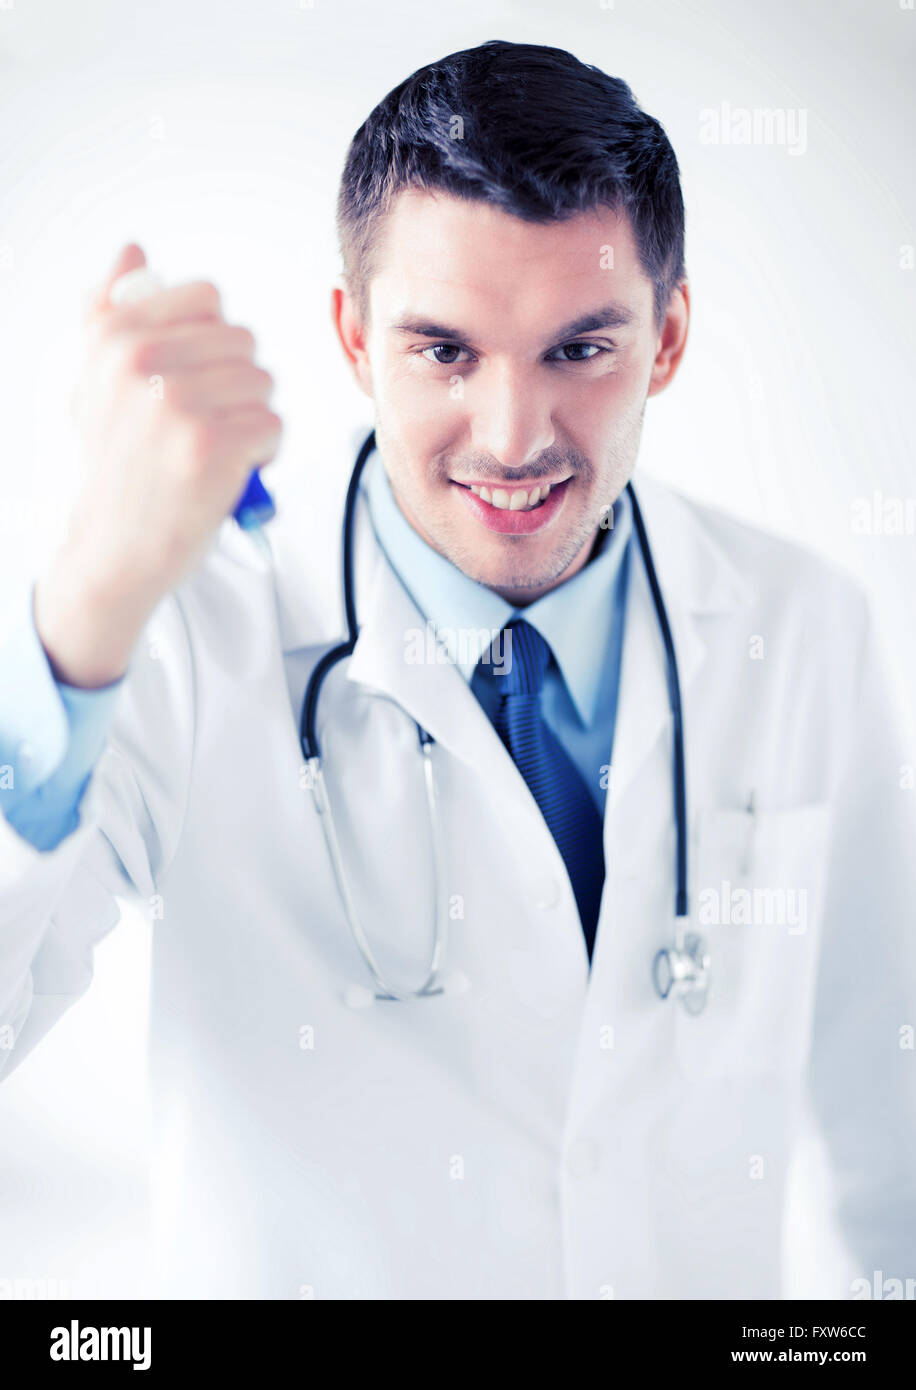 evil doctor holding syringe with injection Stock Photo